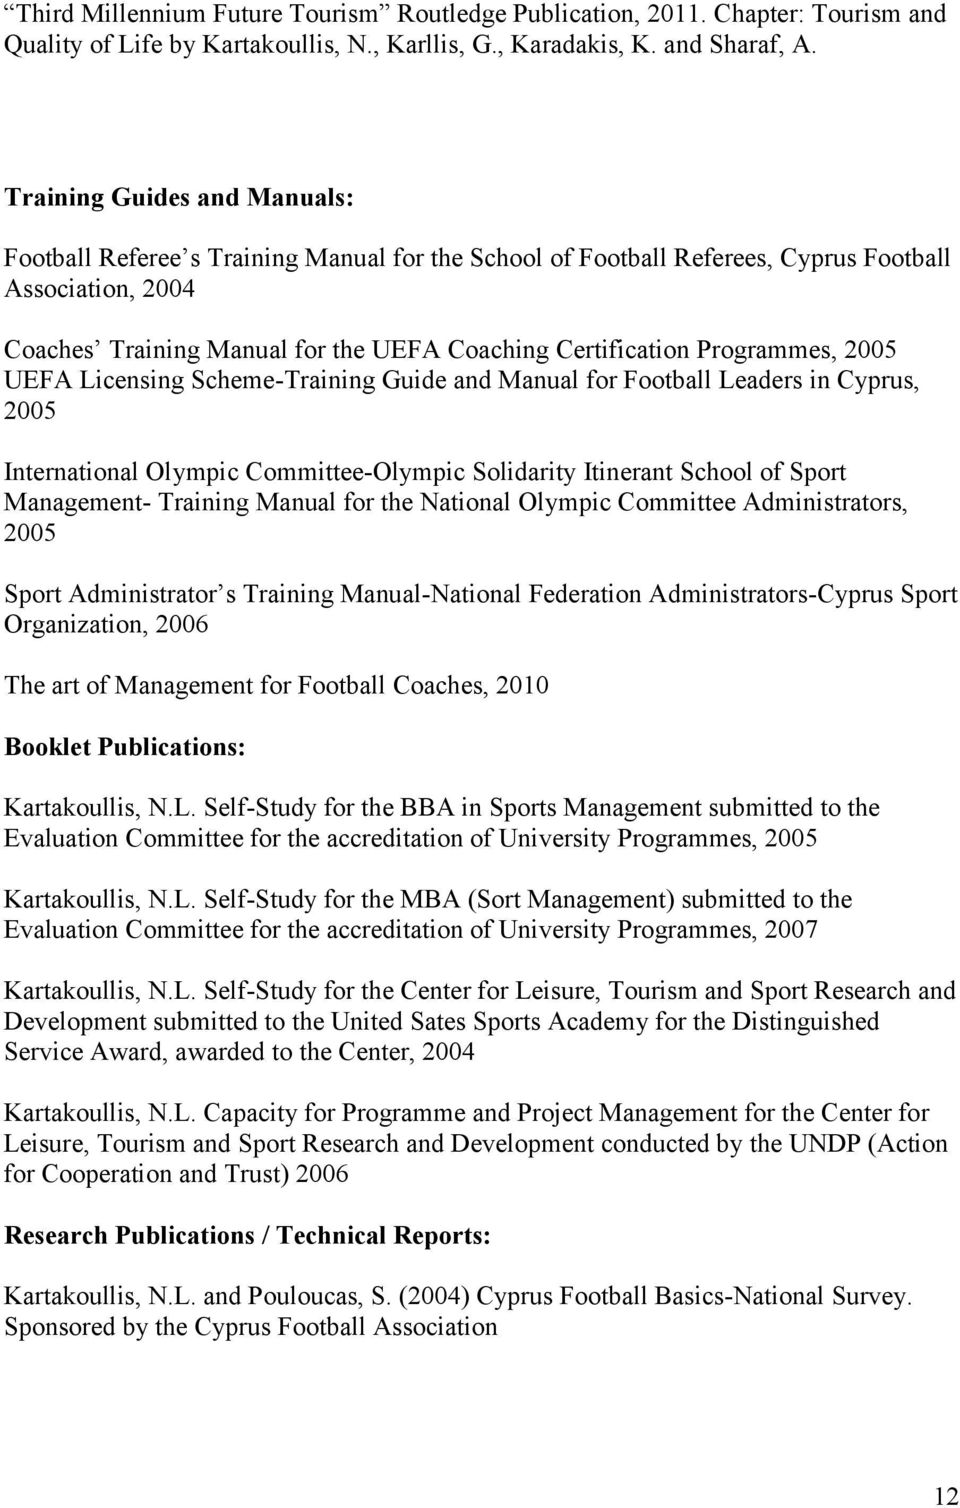 Programmes, 2005 UEFA Licensing Scheme-Training Guide and Manual for Football Leaders in Cyprus, 2005 International Olympic Committee-Olympic Solidarity Itinerant School of Sport Management- Training